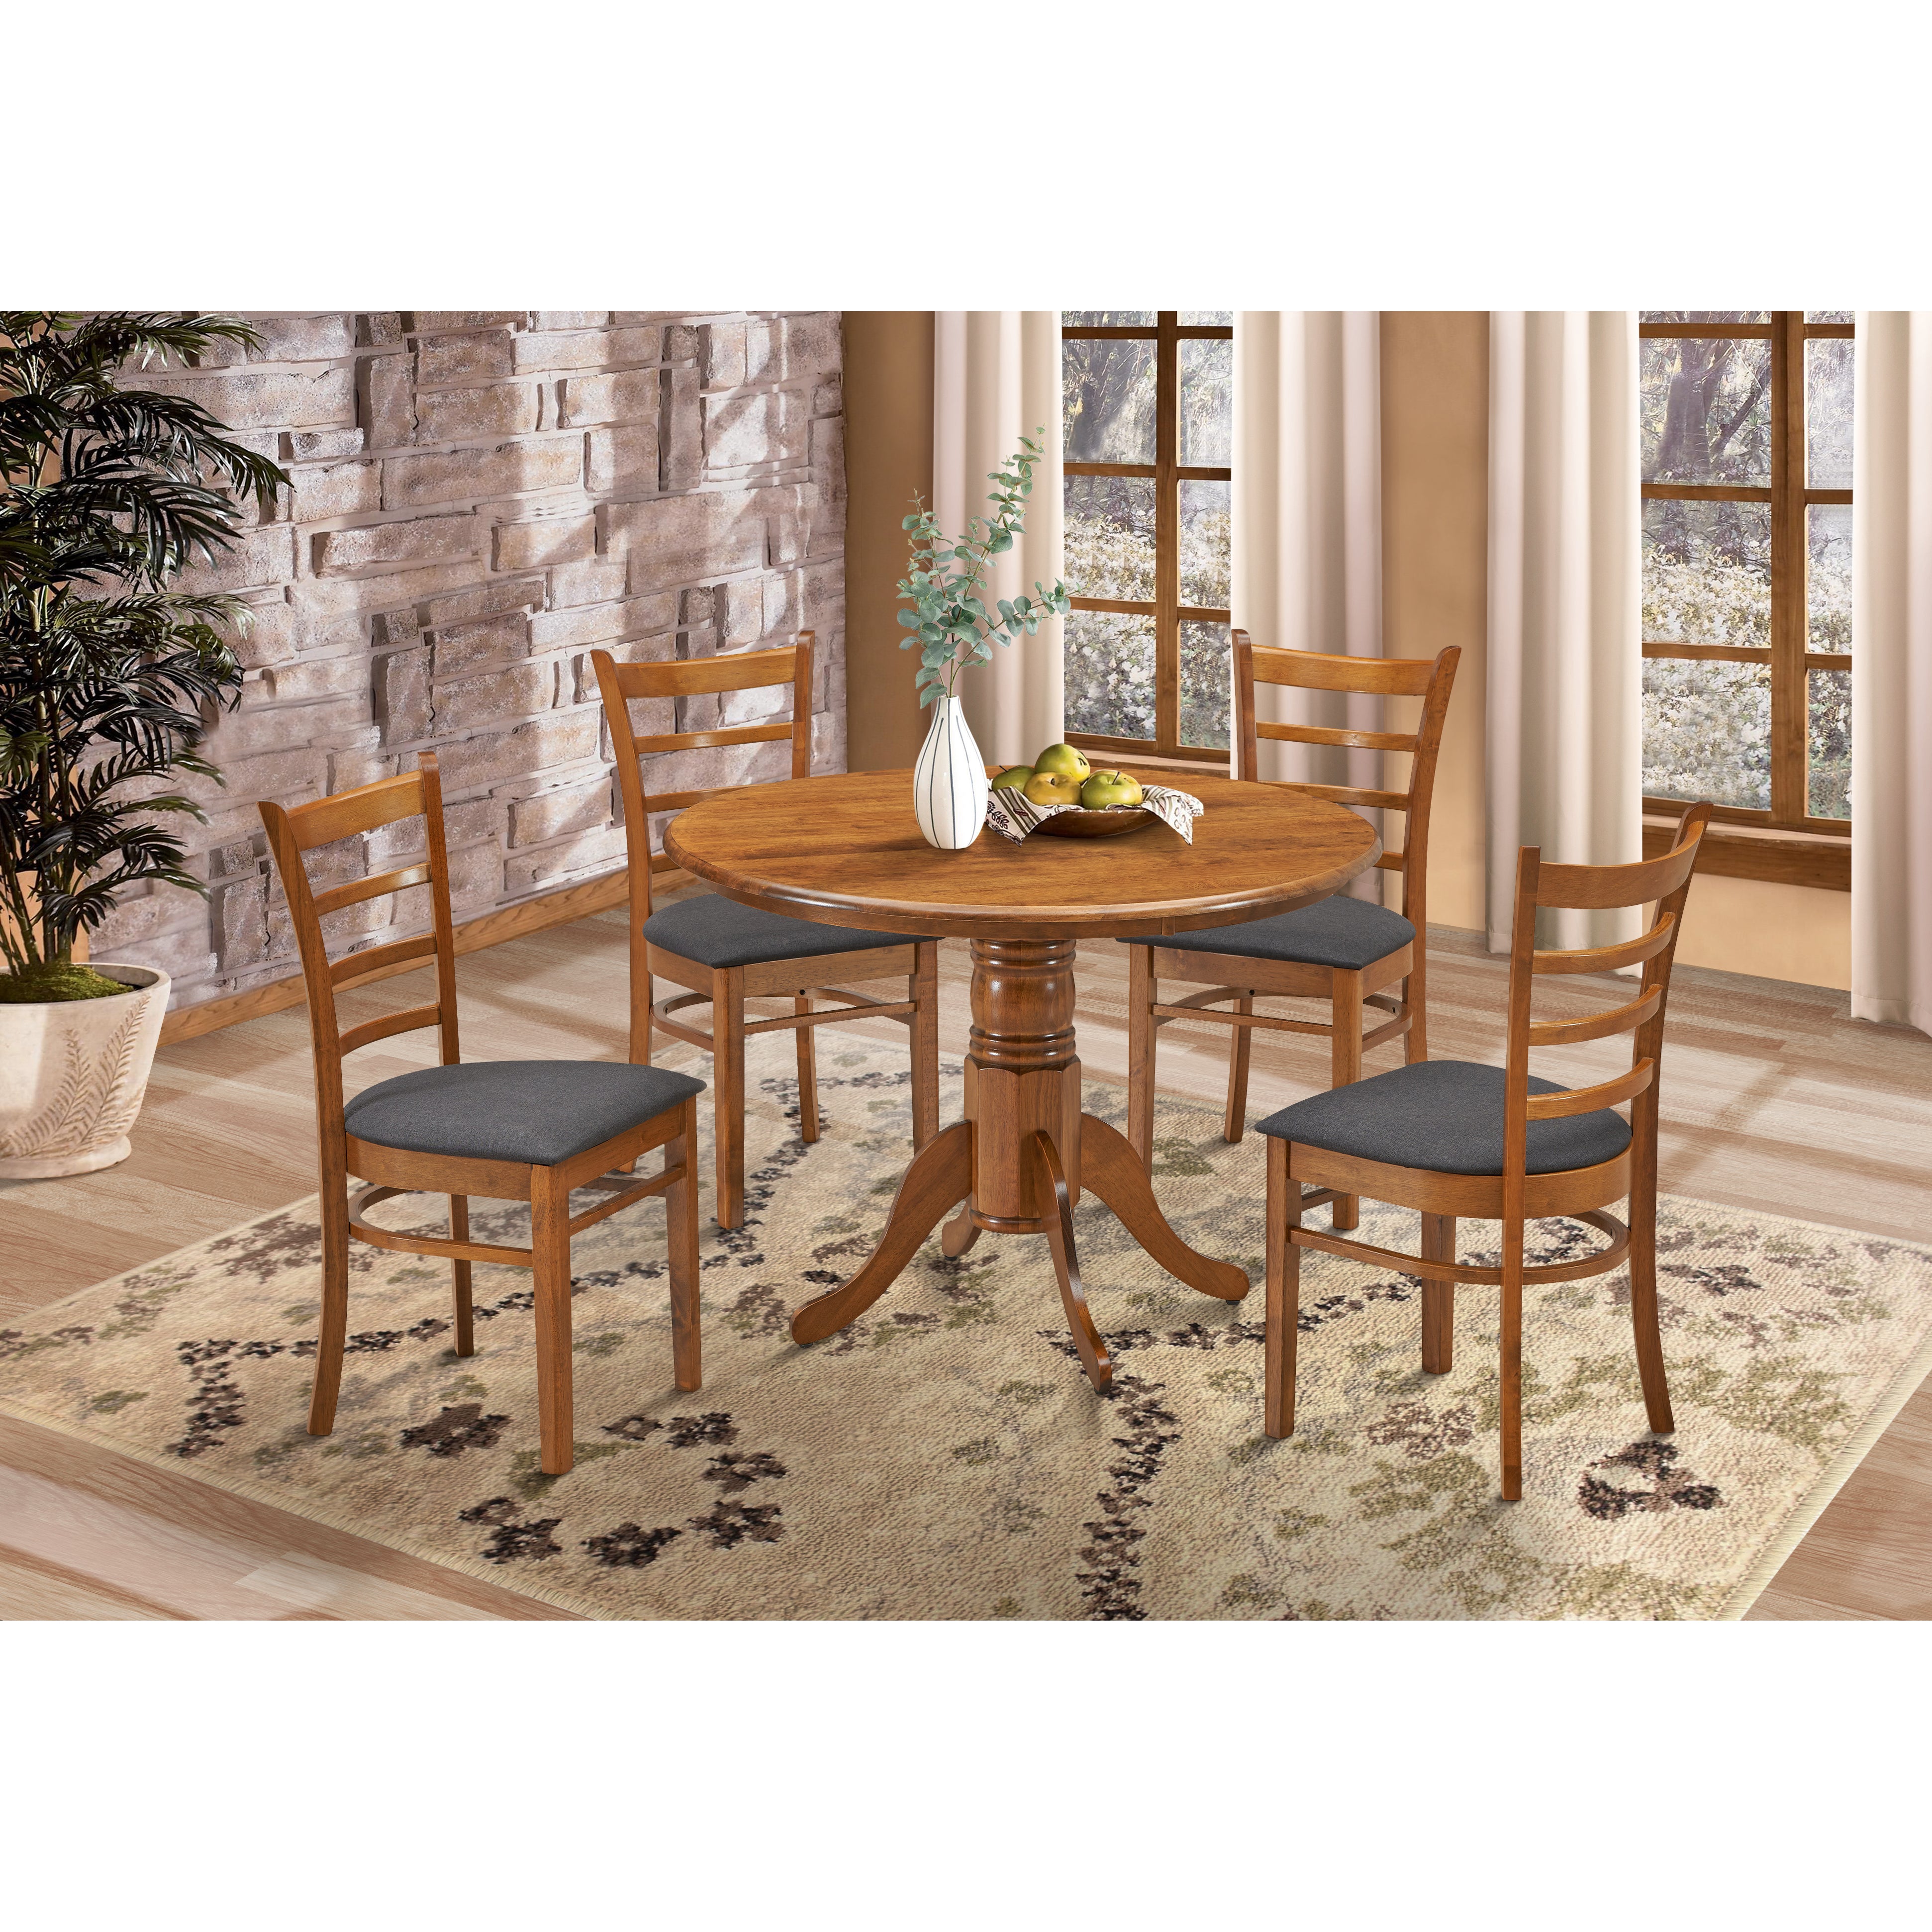 Linaria Dining Chair Set of 4 Crossback Solid Rubber Wood Fabric Seat - Walnut Deals499